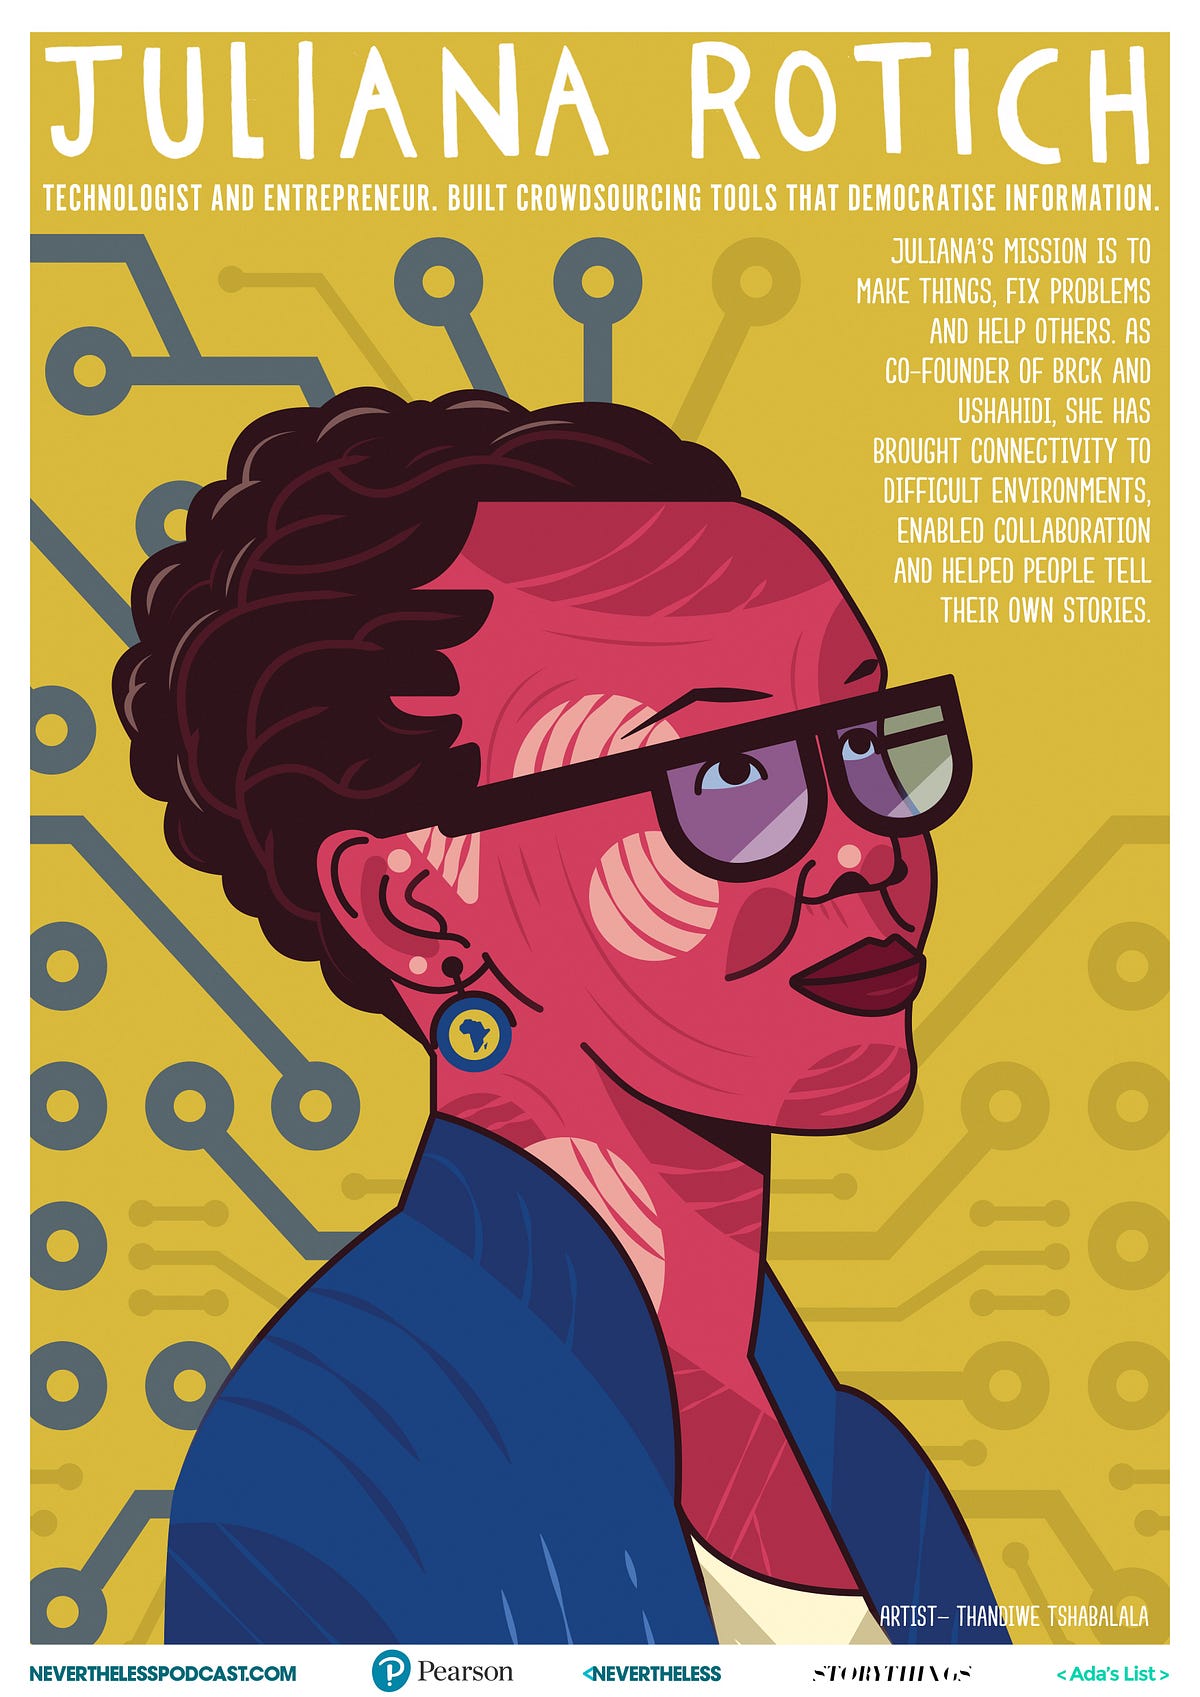 Image of Juliana Rotich is a technologist, strategic advisor, entrepreneur, and keynote speaker. She is co-founder of BRCK Inc, a hardware and services technology company based in Kenya. BRCK was formed to realise a vision for enabling communication in low infrastructure environments by developing useful, innovative technologies. Juliana also co-founded Ushahidi Inc., a non-profit tech company, which specialises in developing free and open source software for changing how information flows in the world